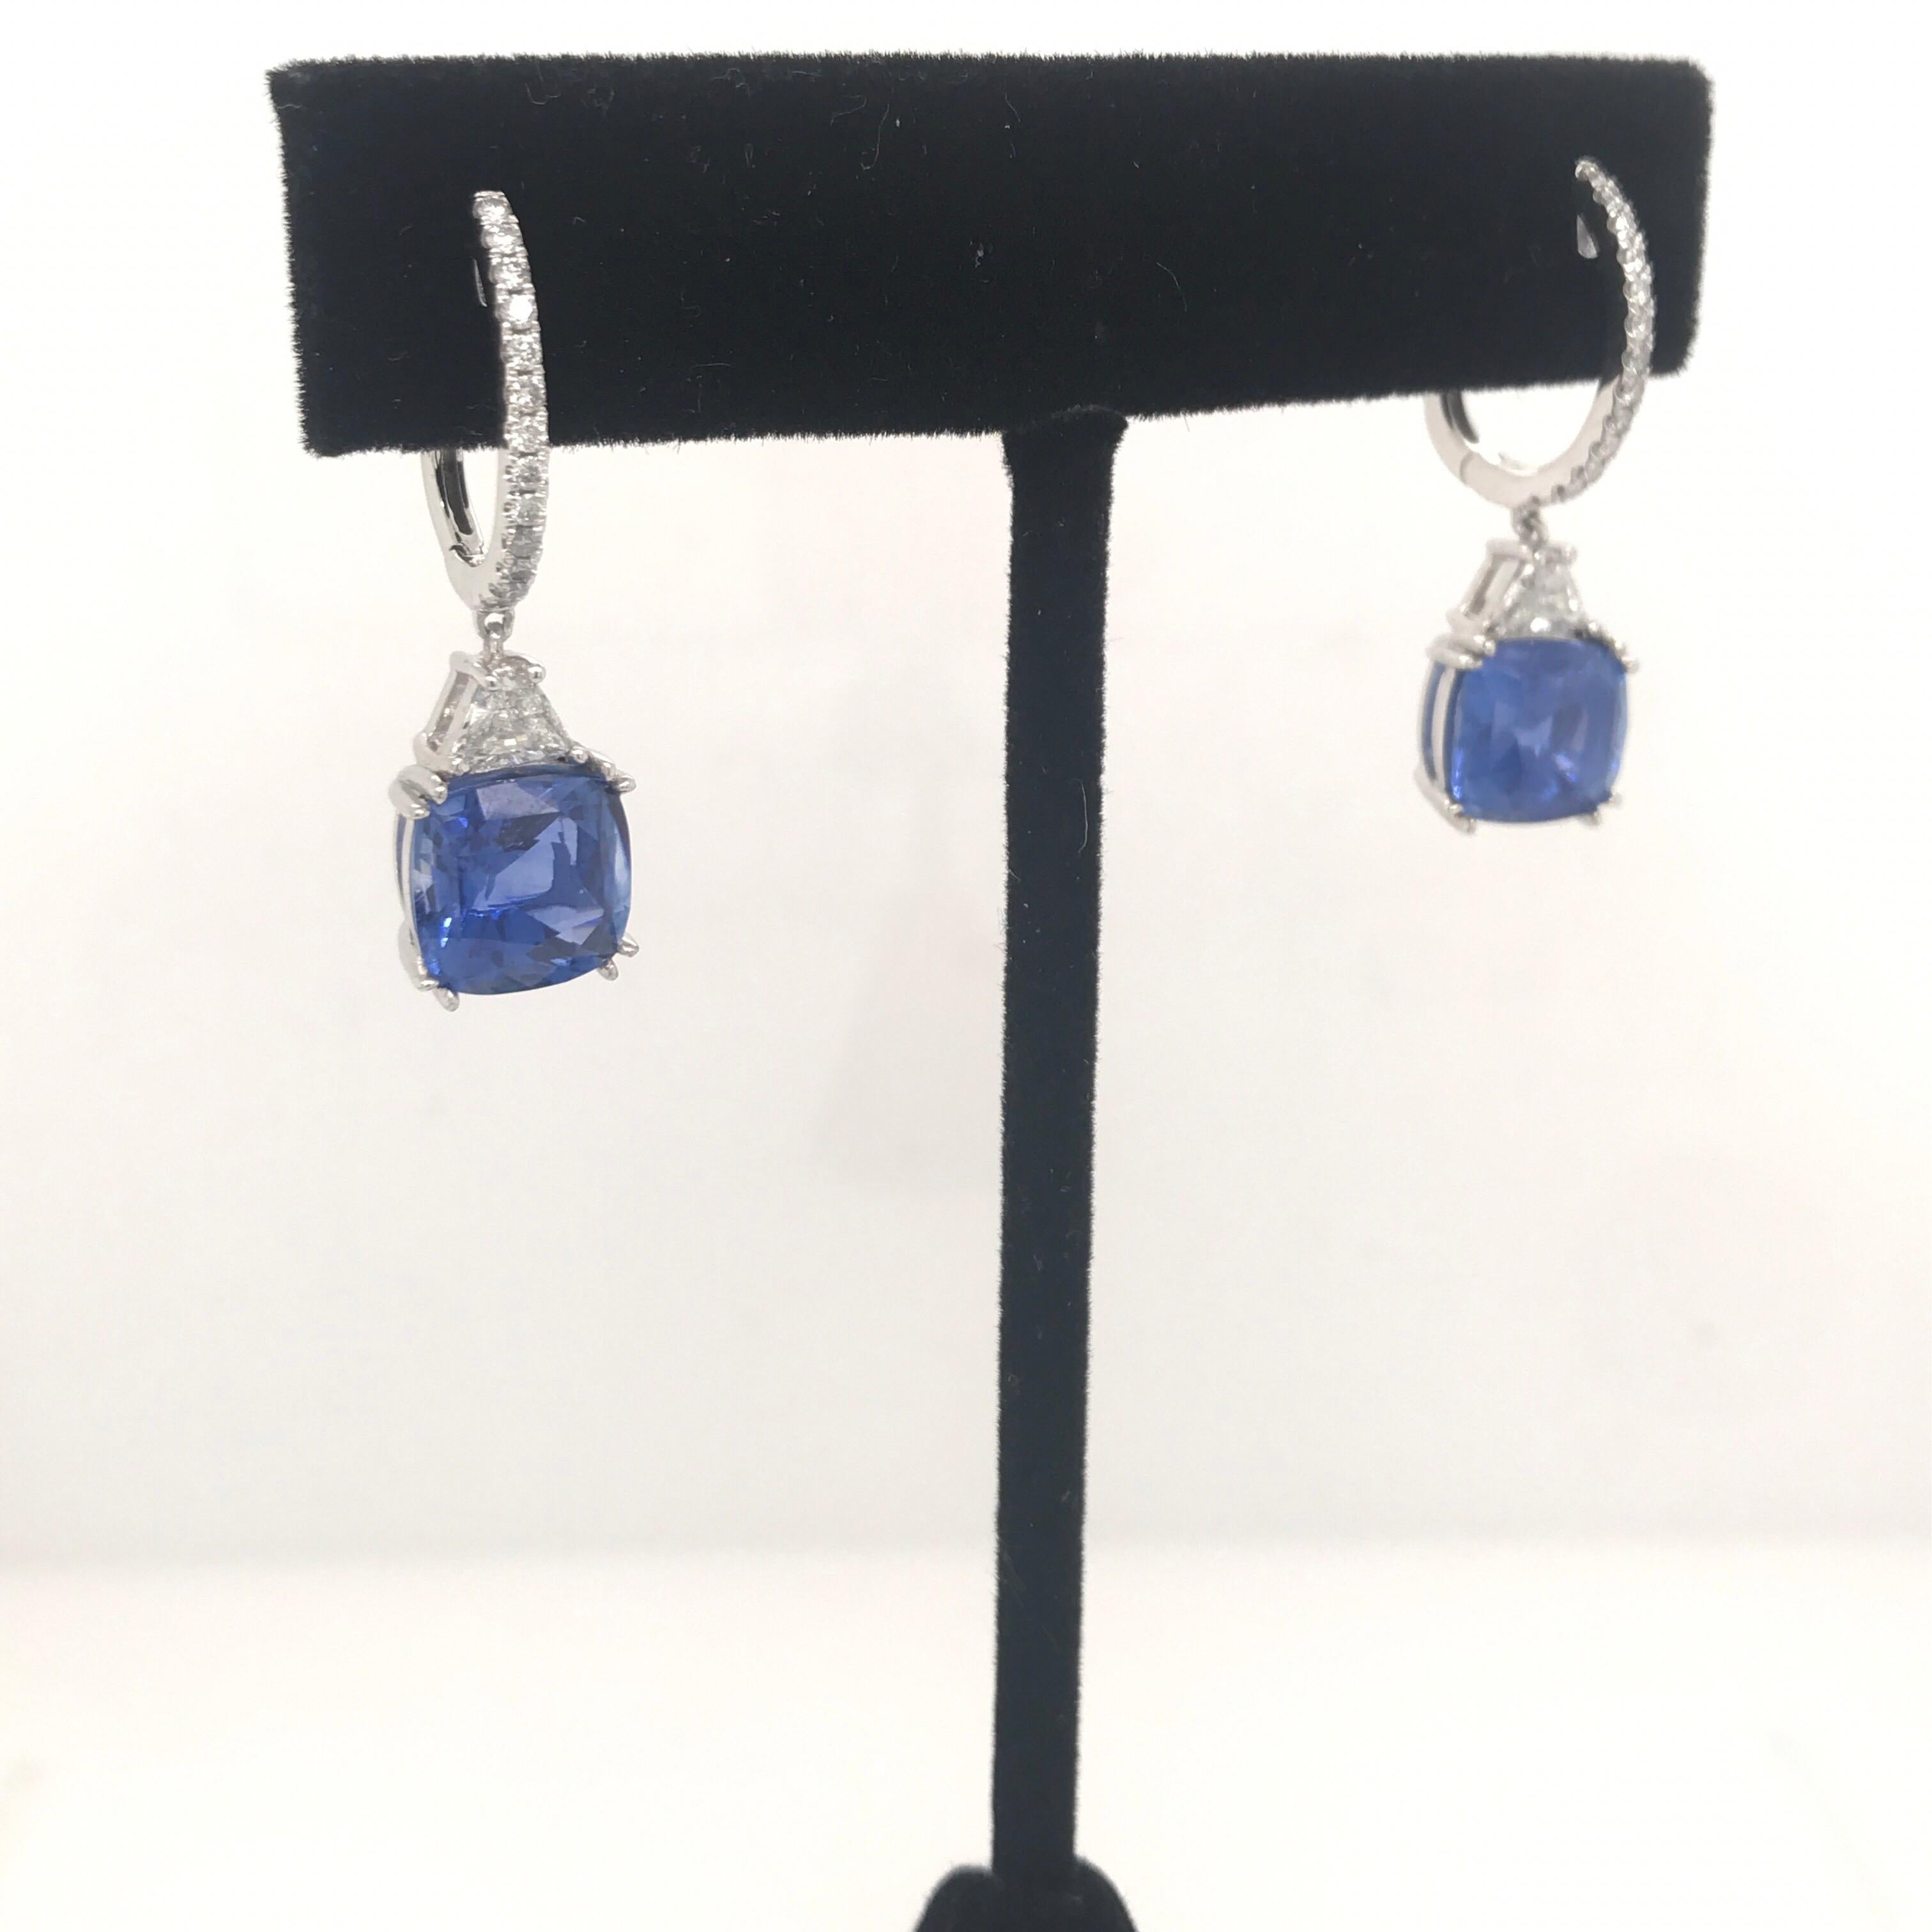 Platinum drop earrings featuring two blue sapphires weighing 8.01 carats, 2 trapezoids weighing 0.45 carats and 26 round brilliants weighing 0.25 carats.